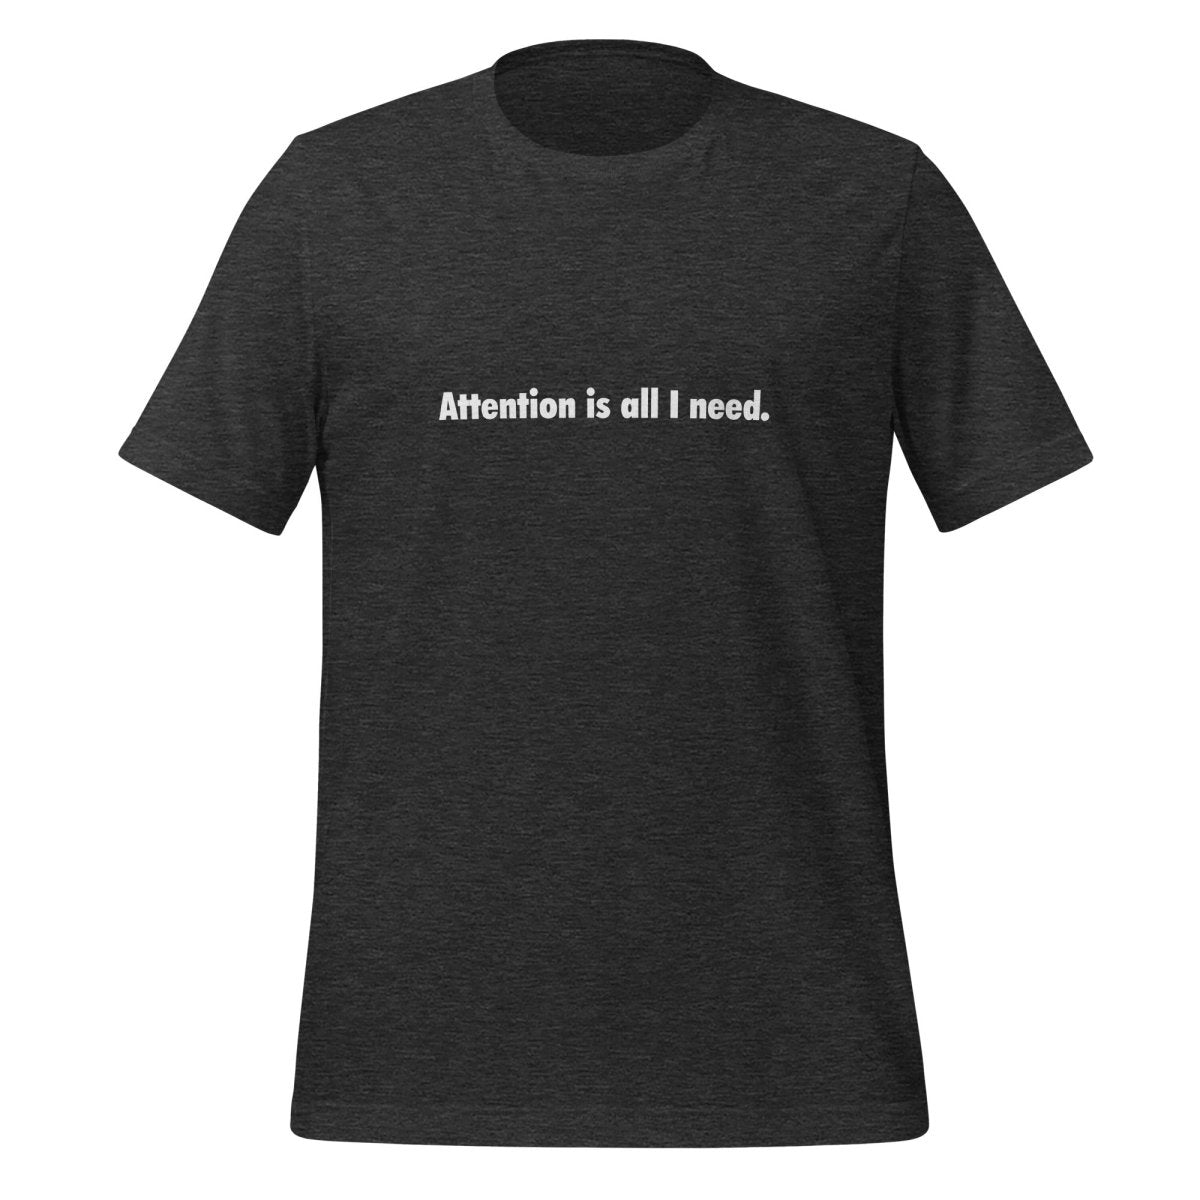 Attention is all I need. T - Shirt (unisex) - Dark Grey Heather - AI Store